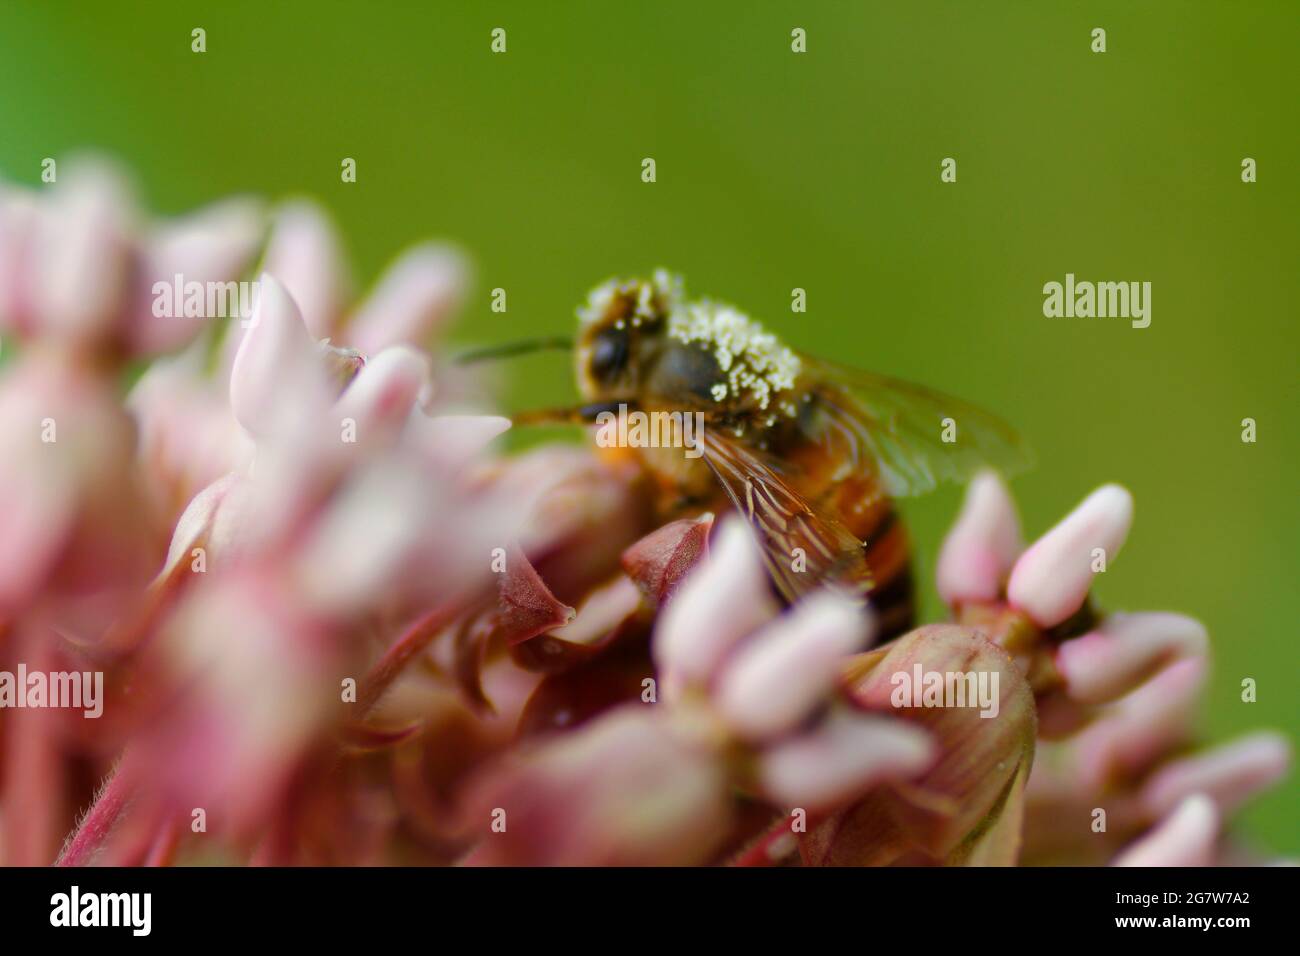 Bee Covered with Pollen Feeding on a Milkweed Flowers Stock Photo